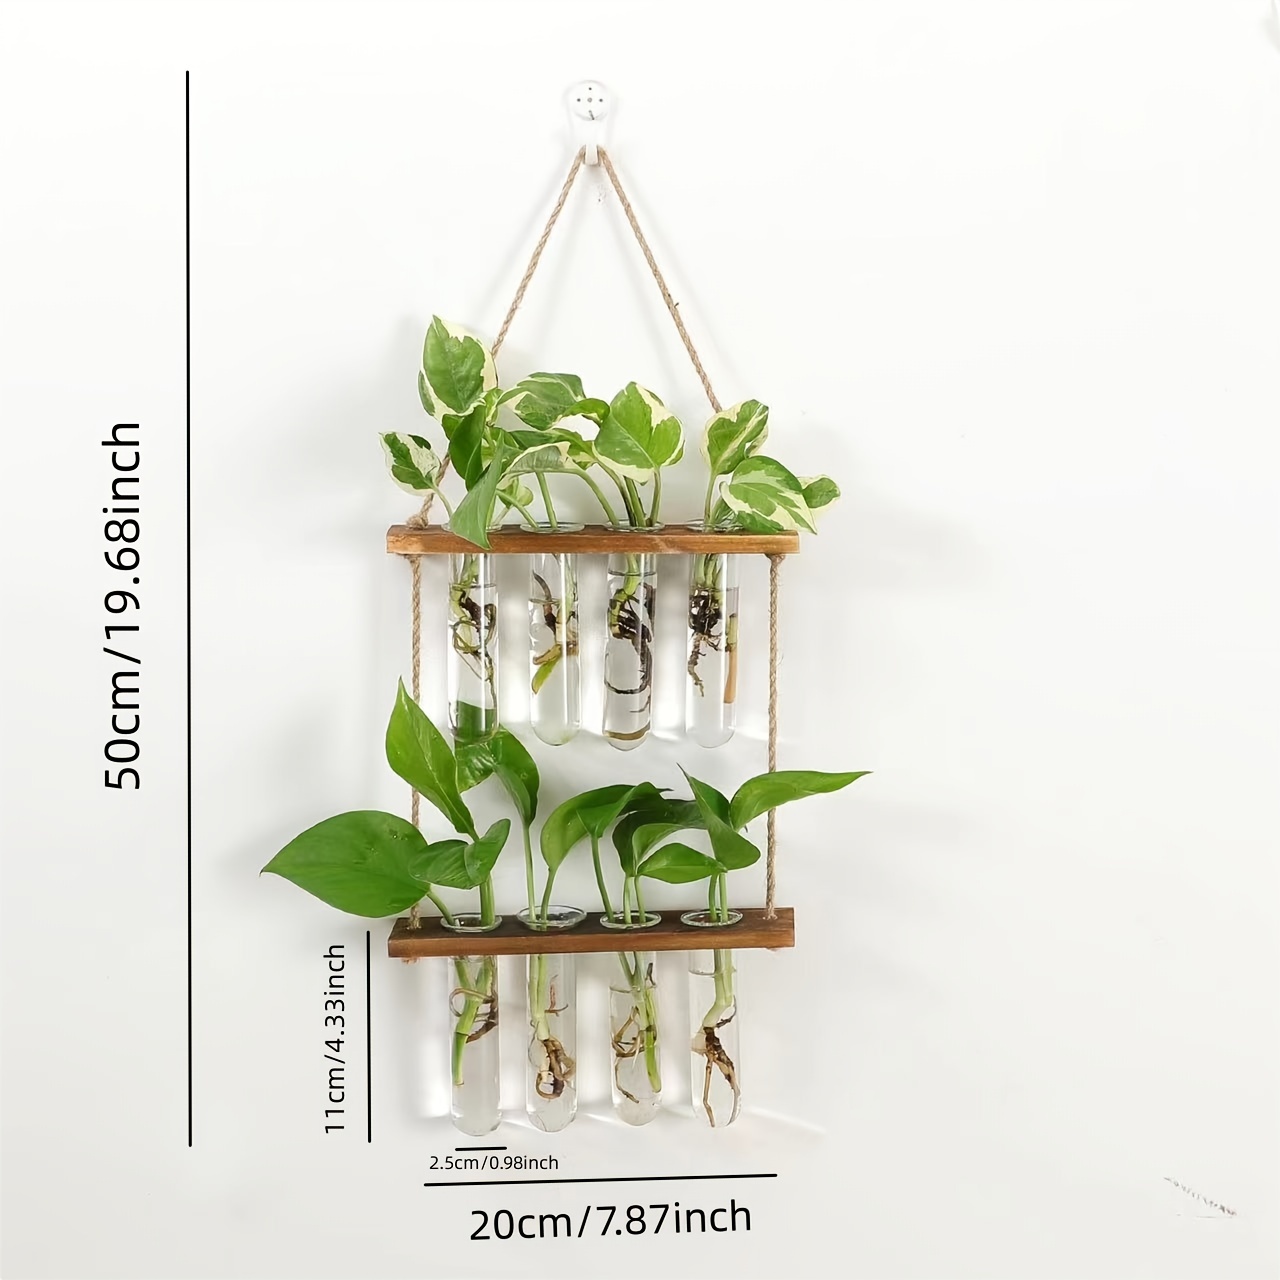 HYINDOOR Wall Hanging Planter Terrarium 2 Tired Test Tube Vase Glass  Planter Plant Propagation Station Plant Hangers of Rope with Wooden Stand  and 8